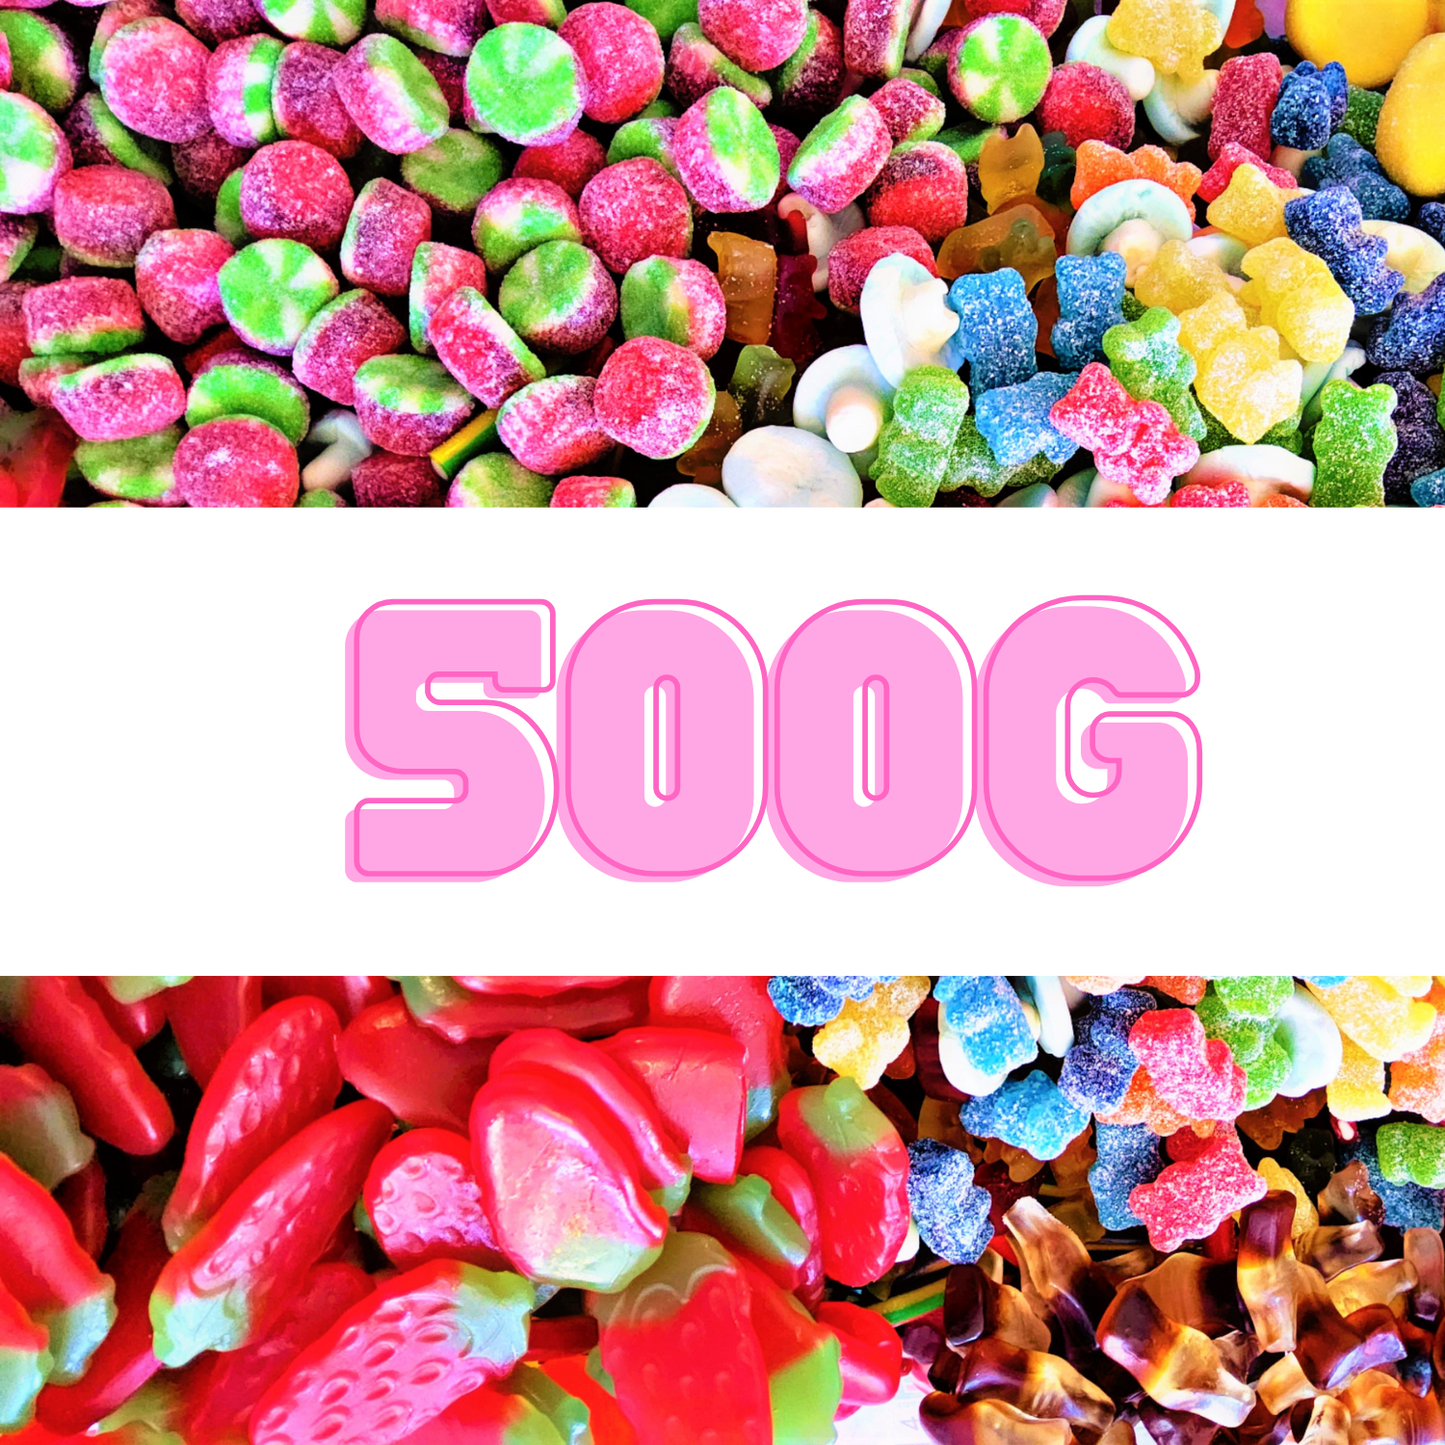 Create Your Own Pick`n MIx 500g Box / Bag selection